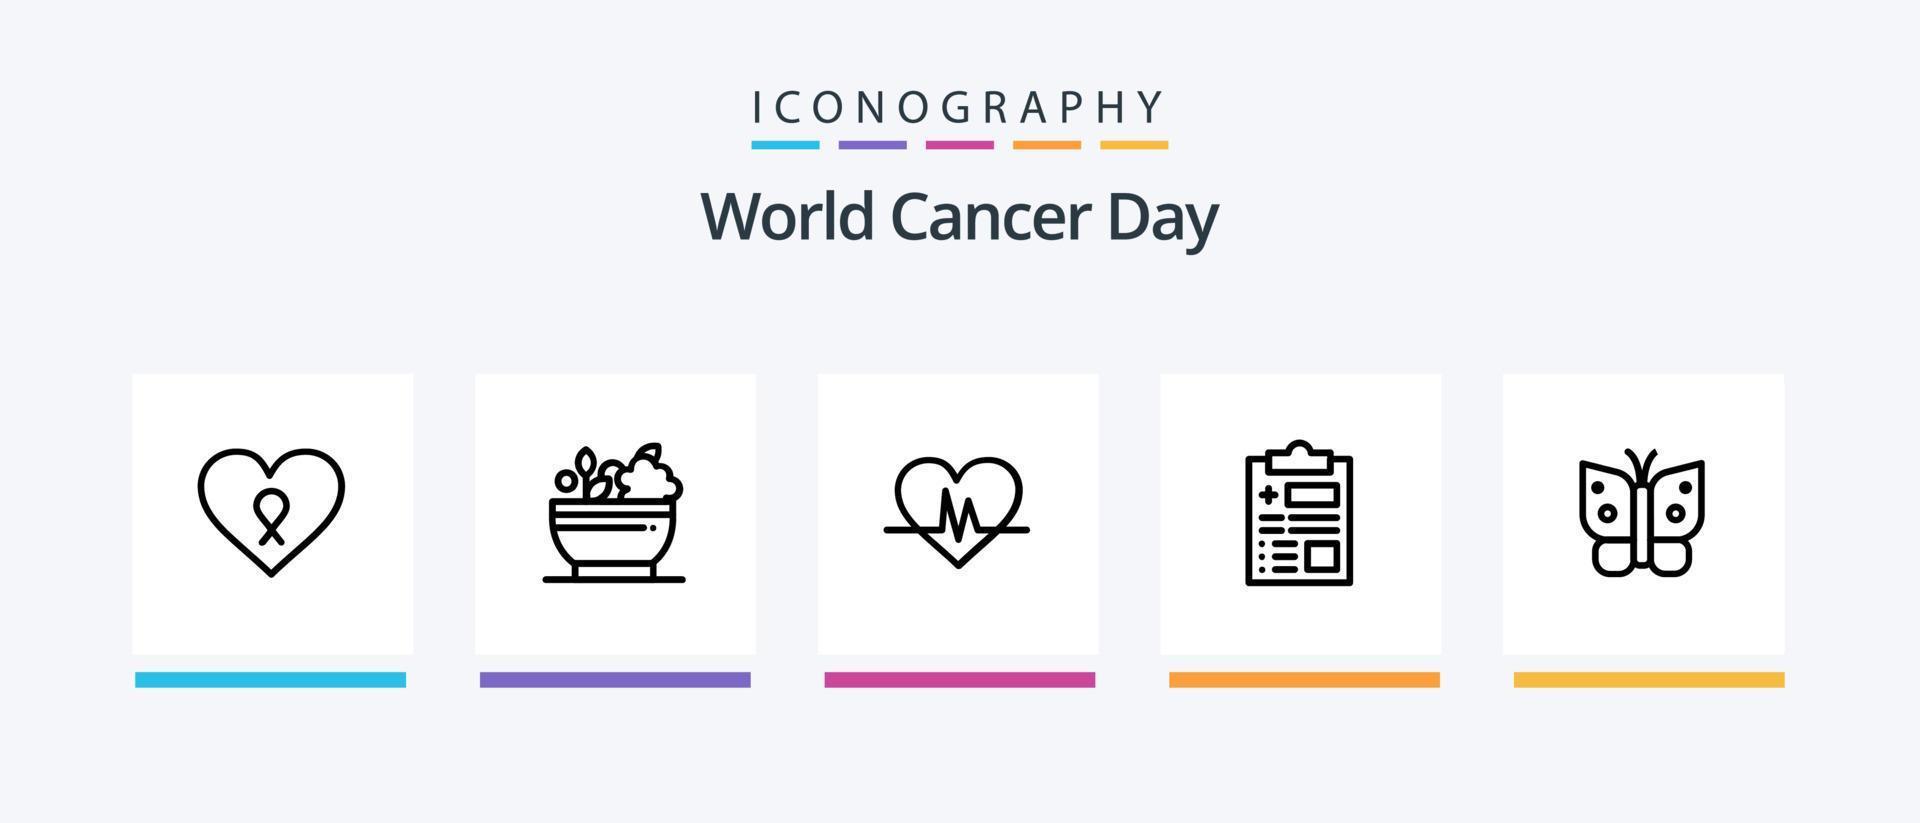 World Cancer Day Line 5 Icon Pack Including patient. love. syringe. heart. cancer. Creative Icons Design vector